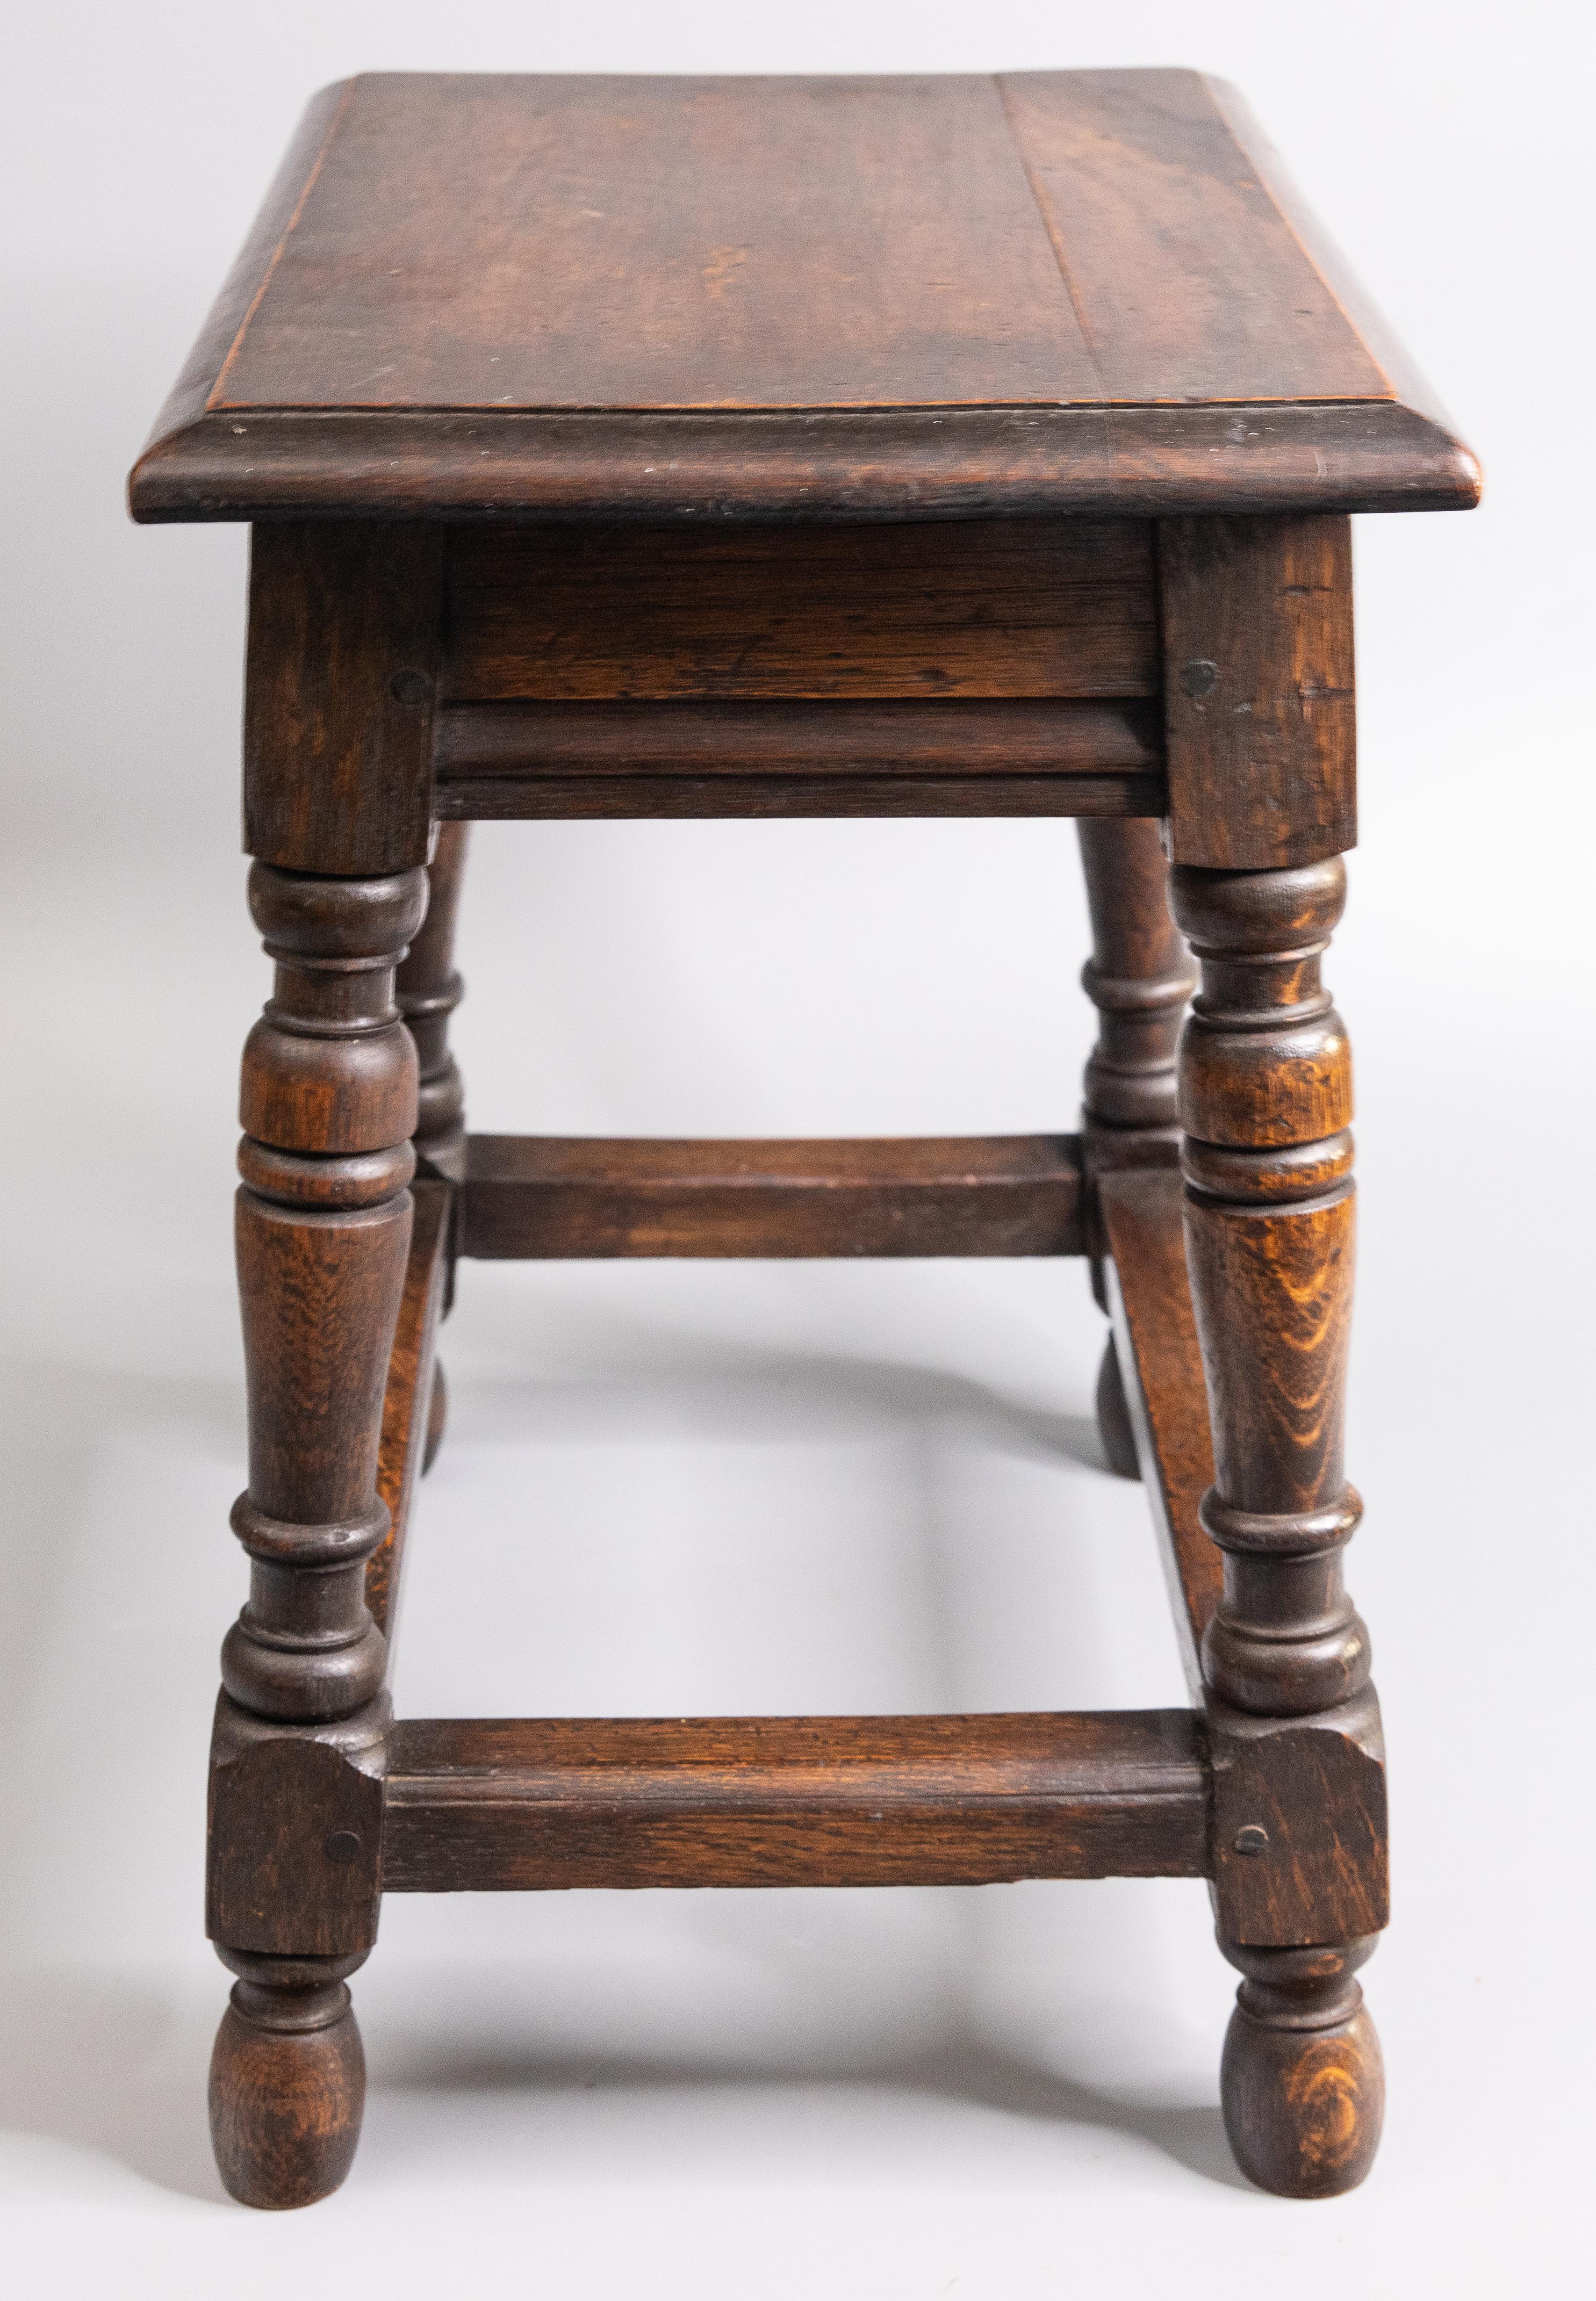 19th Century English Oak Pegged Joint Stool Side Table For Sale 1